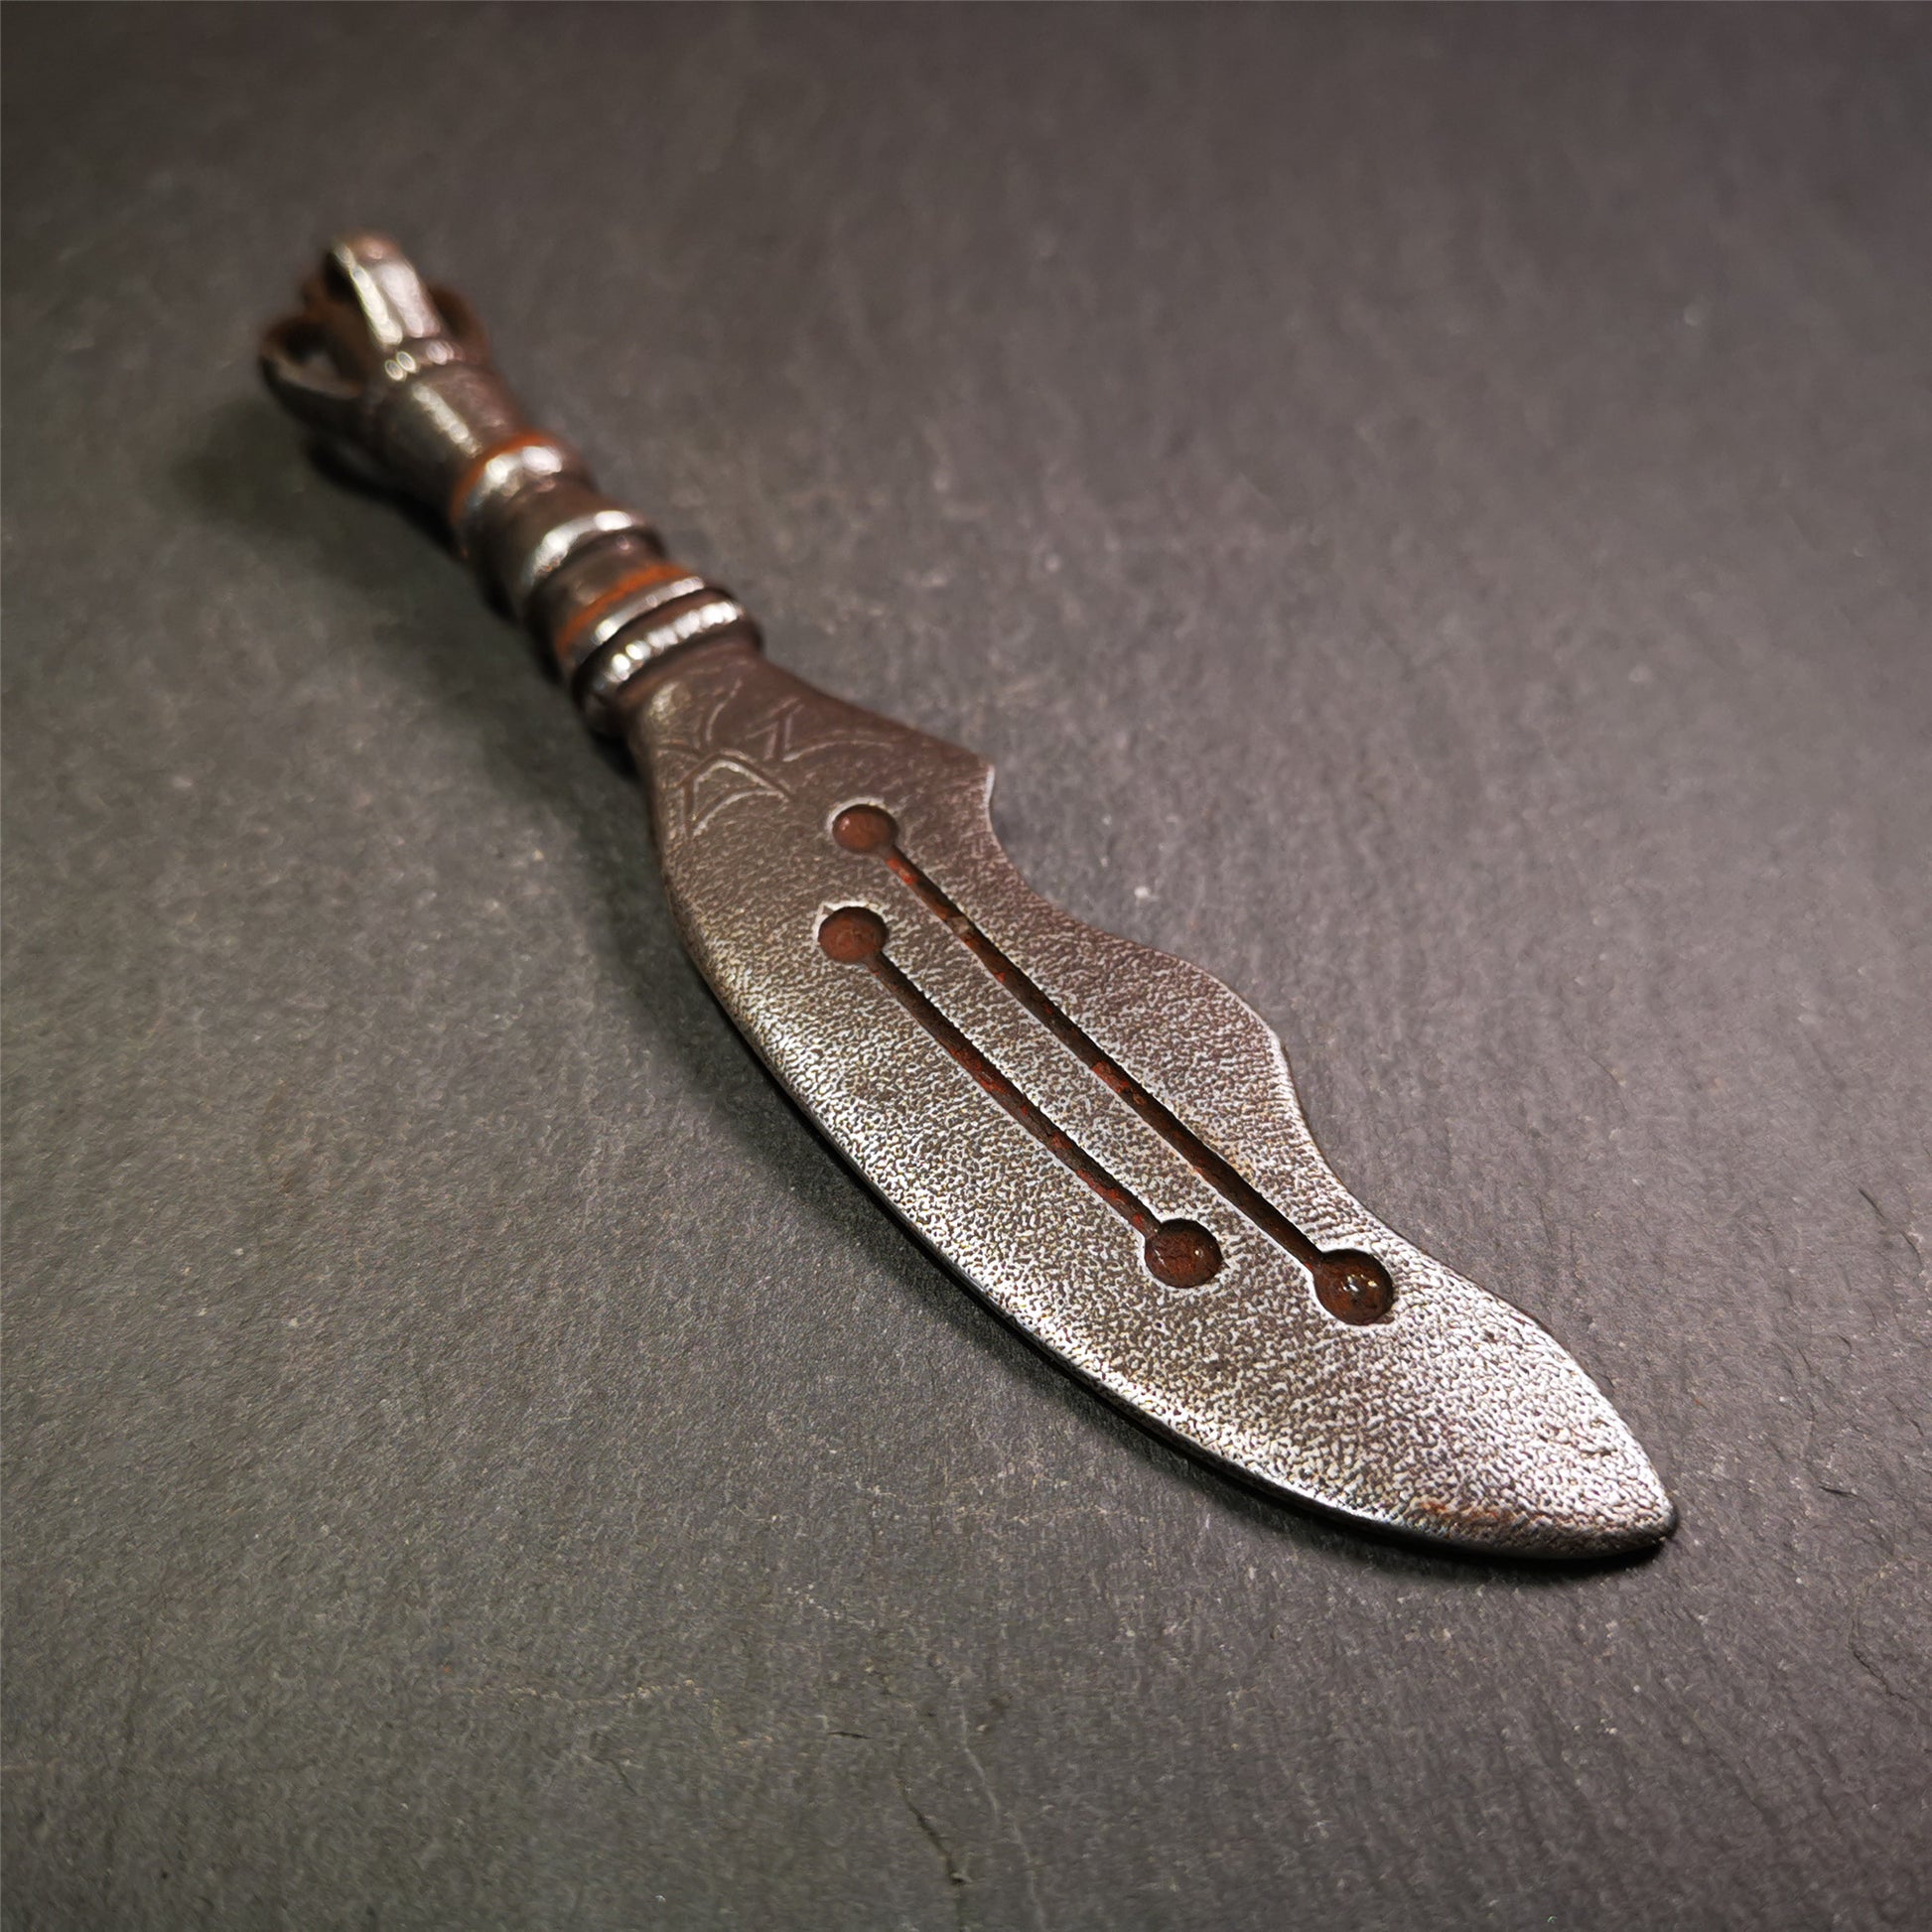 This machete knife is handmade by Tibetan craftsmen from Tibet in 2000s,from Hepo Town, Baiyu County, the birthplace of the famous Tibetan handicrafts.  It's made of cold iron,inlaid red copper wire, and the half vajra at the tail